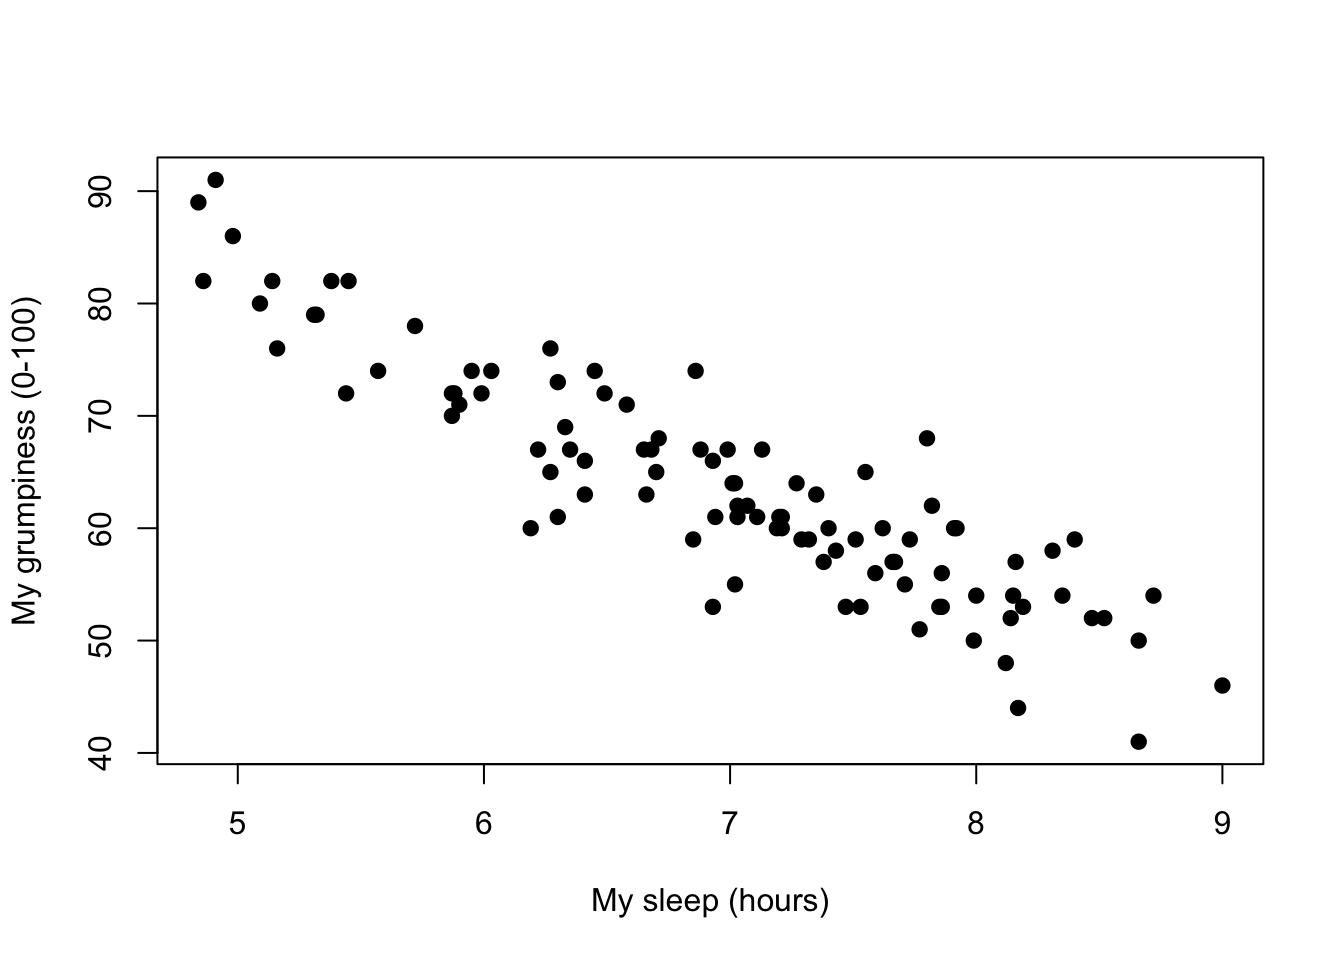 Scatterplot showing grumpiness as a function of hours slept.